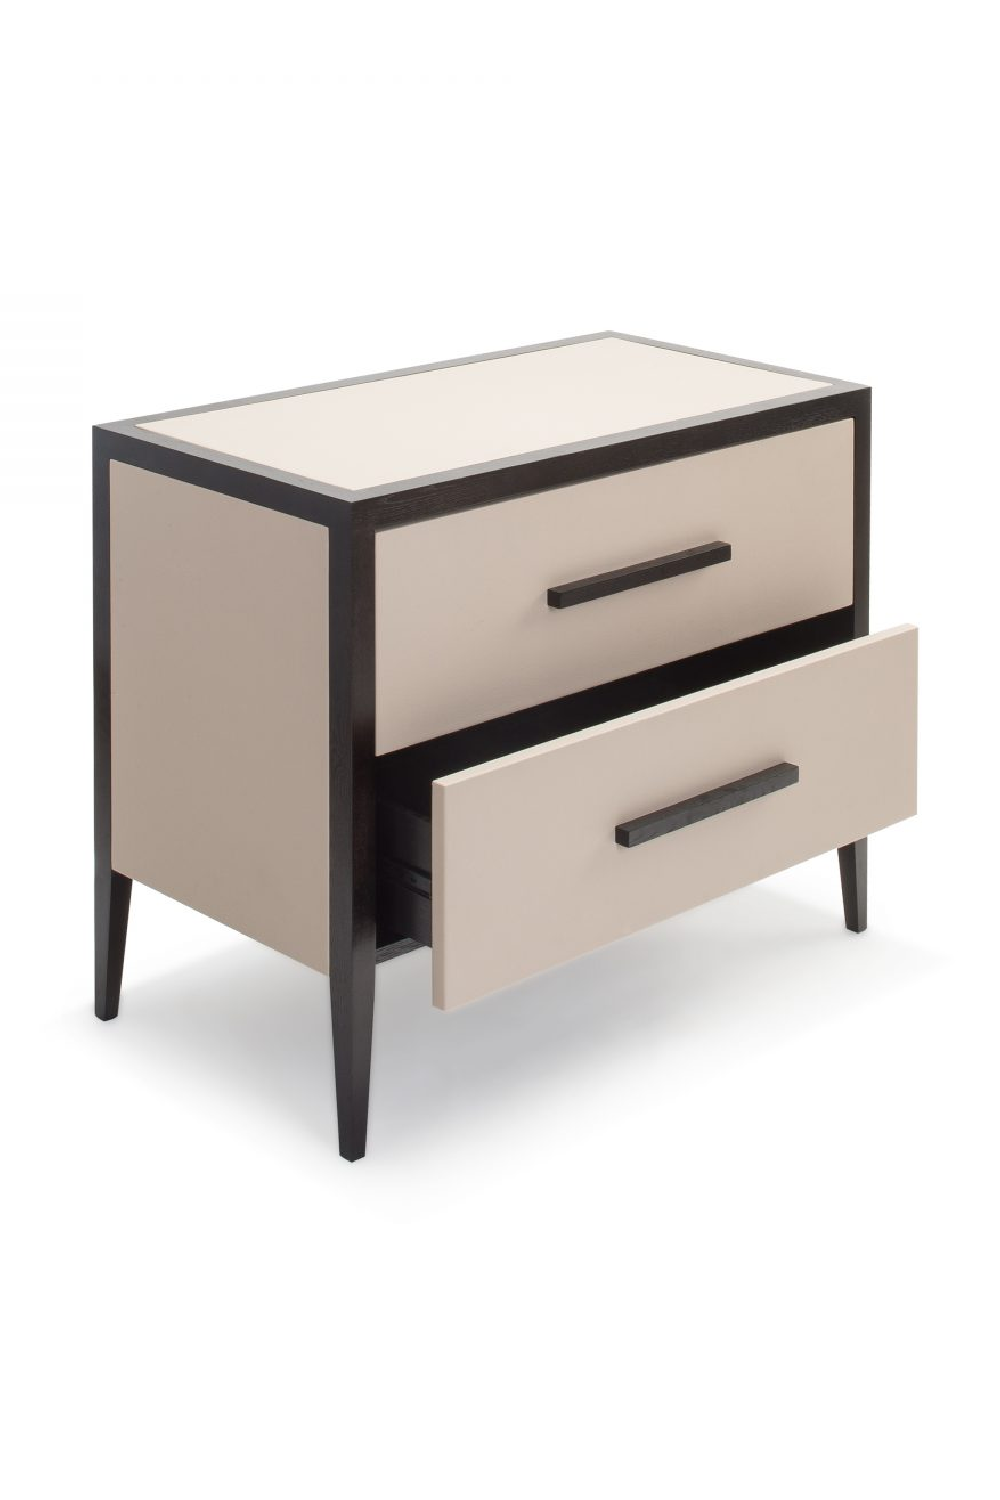 Beige Leather Chest of Drawers | Liang & Eimil Liza | OROA.com